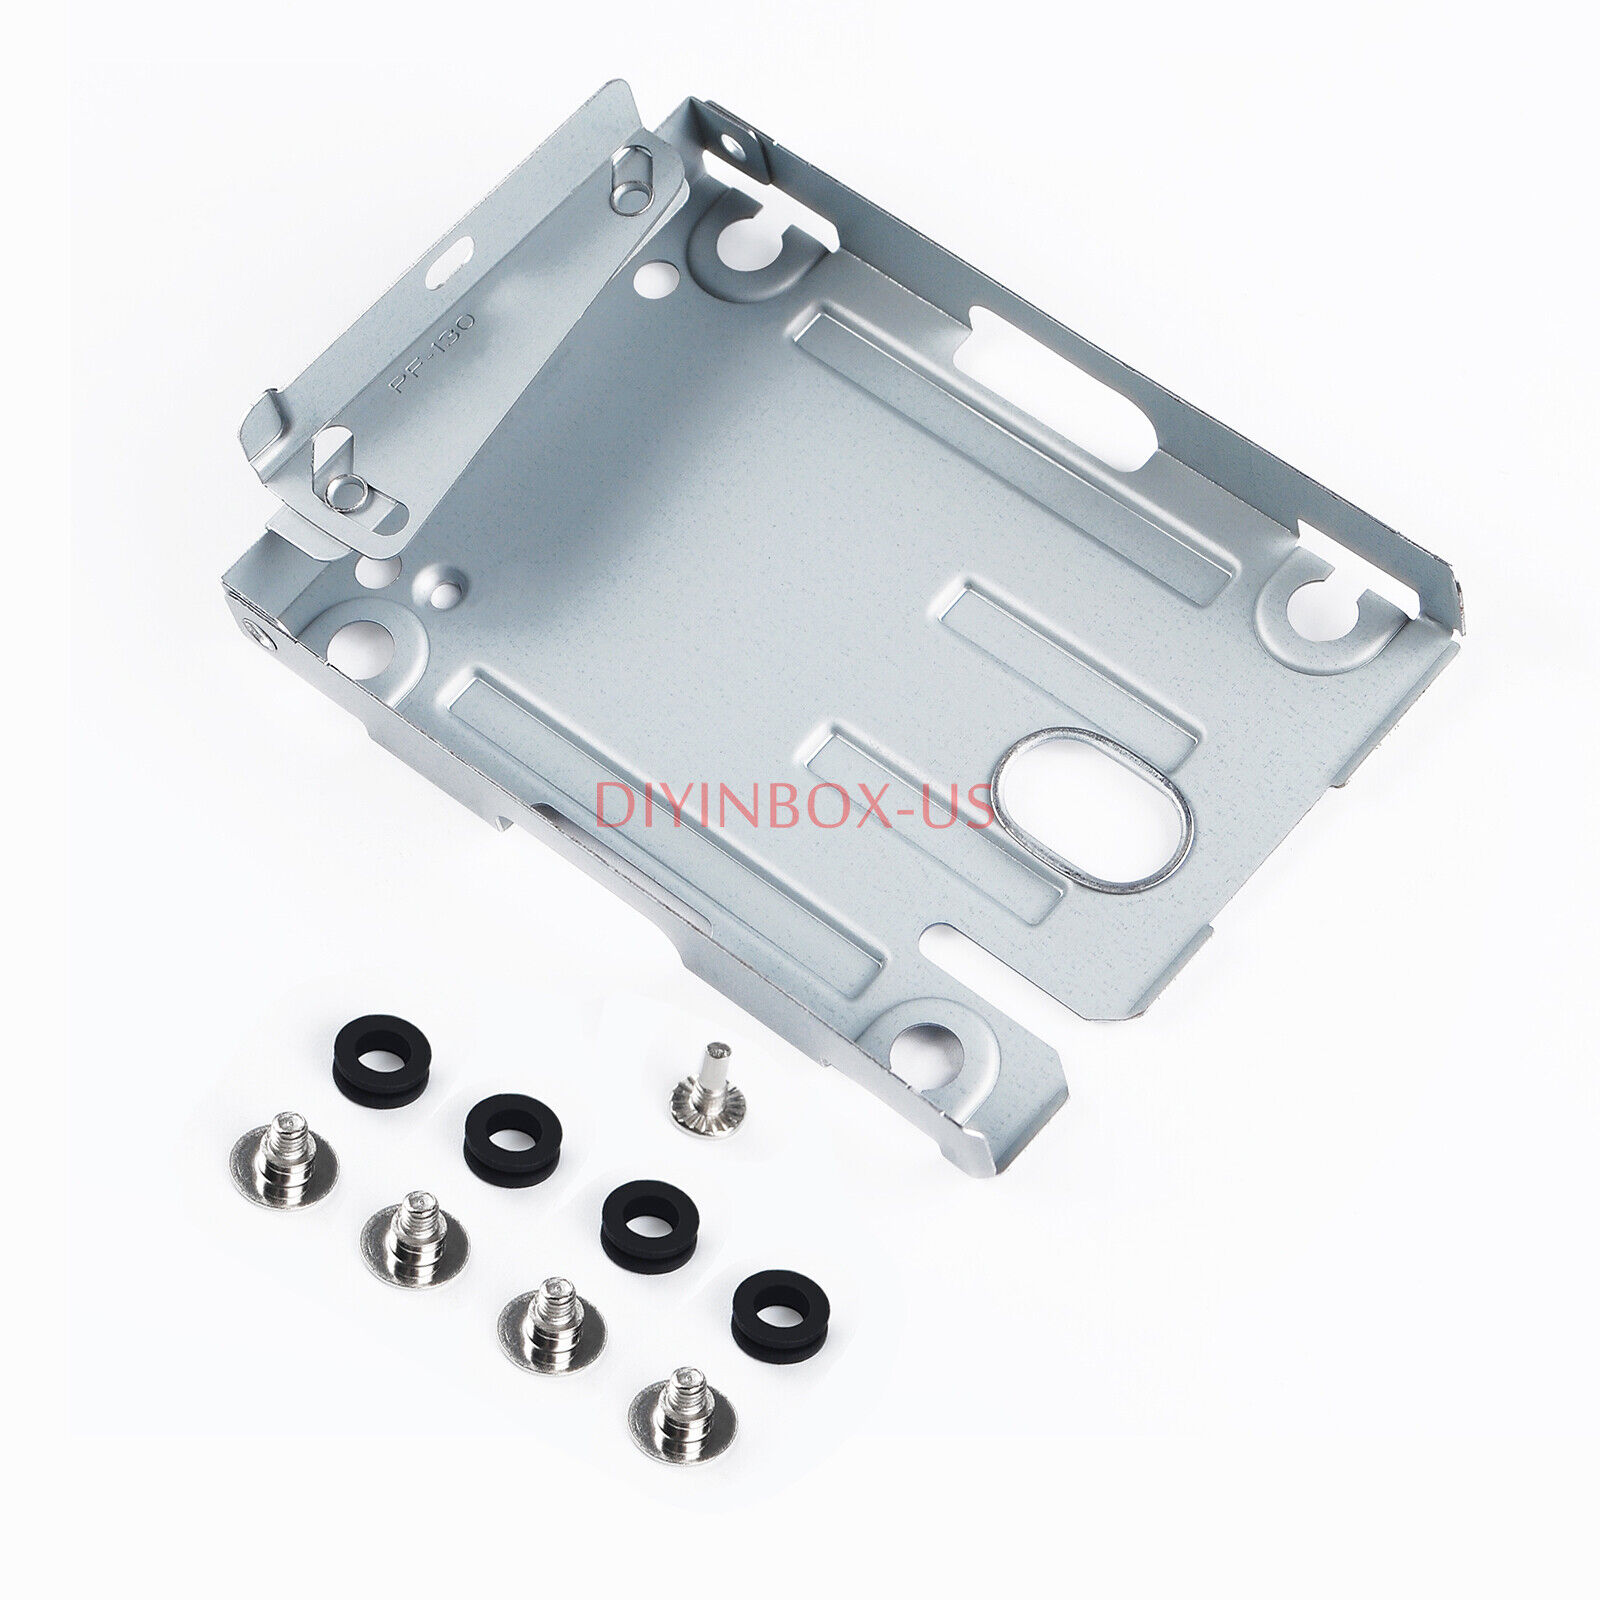 PS3 Super Slim 4000 HDD Consoles Hard Disk Drive Mounting Hard Bracket Caddy @US